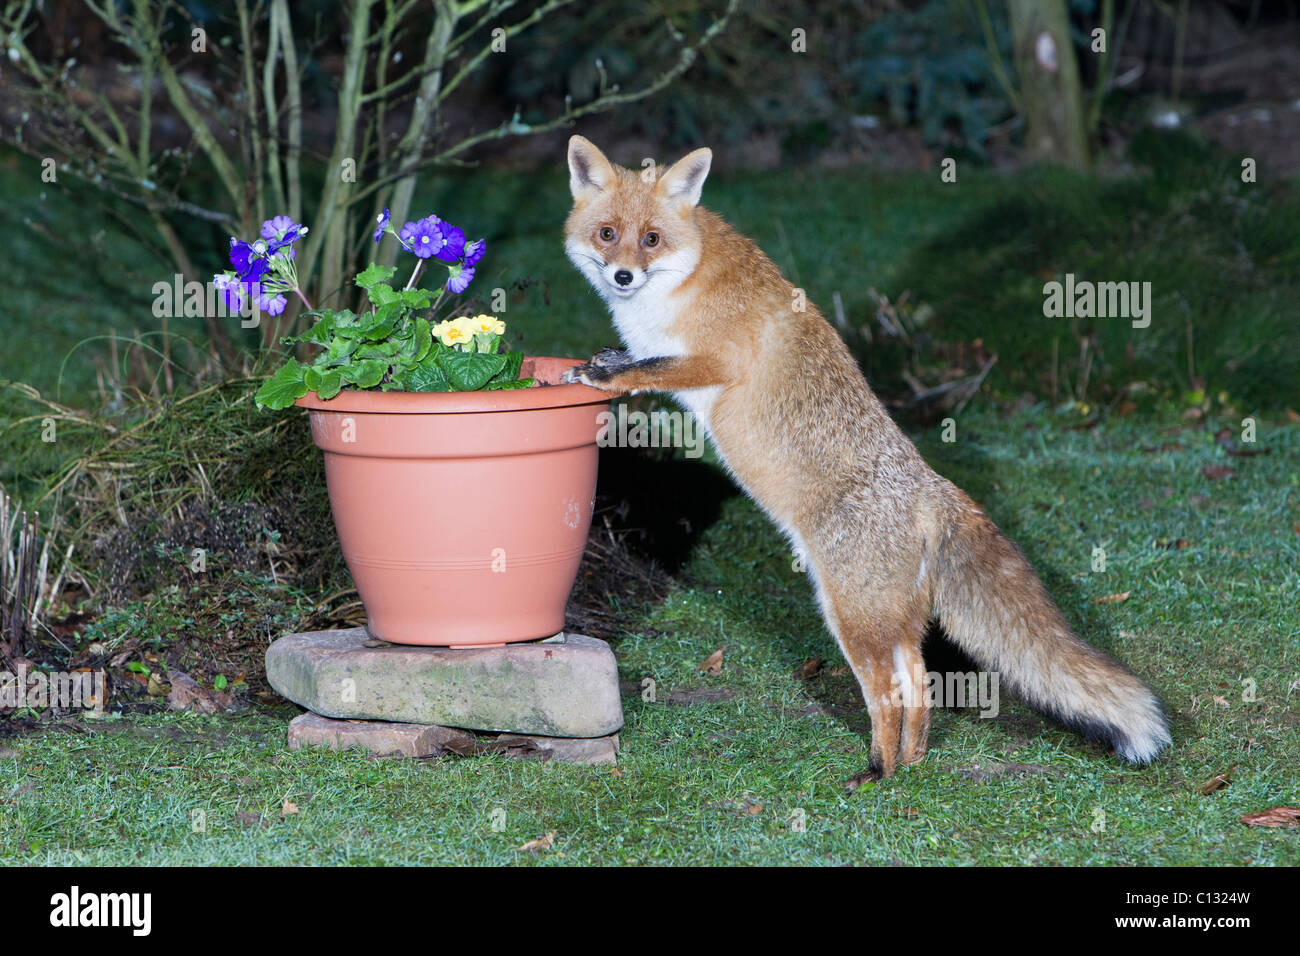 European Fox (Vulpes vulpes), in garden, searching for food in plant pot Stock Photo